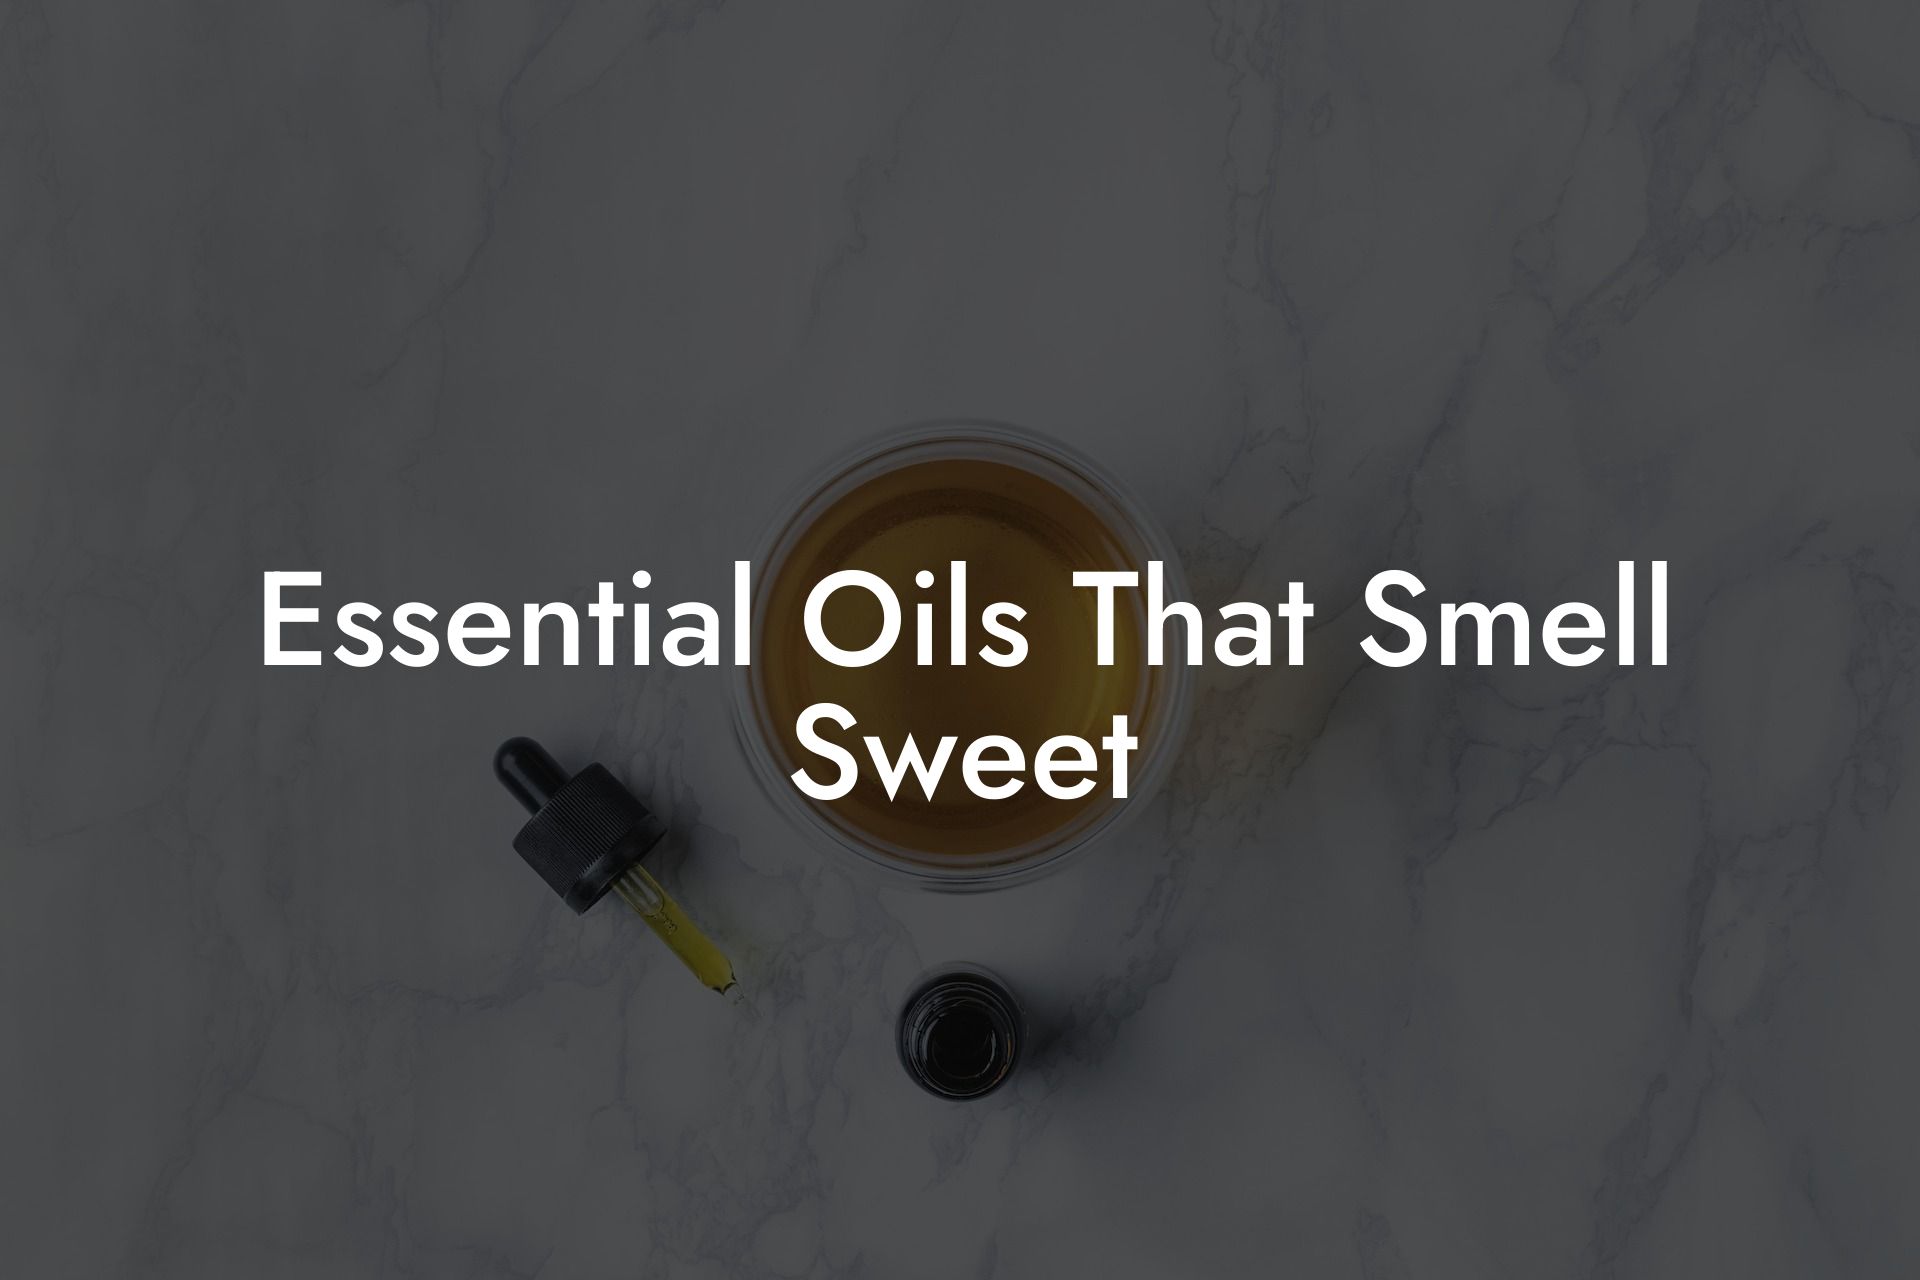 Essential Oils That Smell Sweet